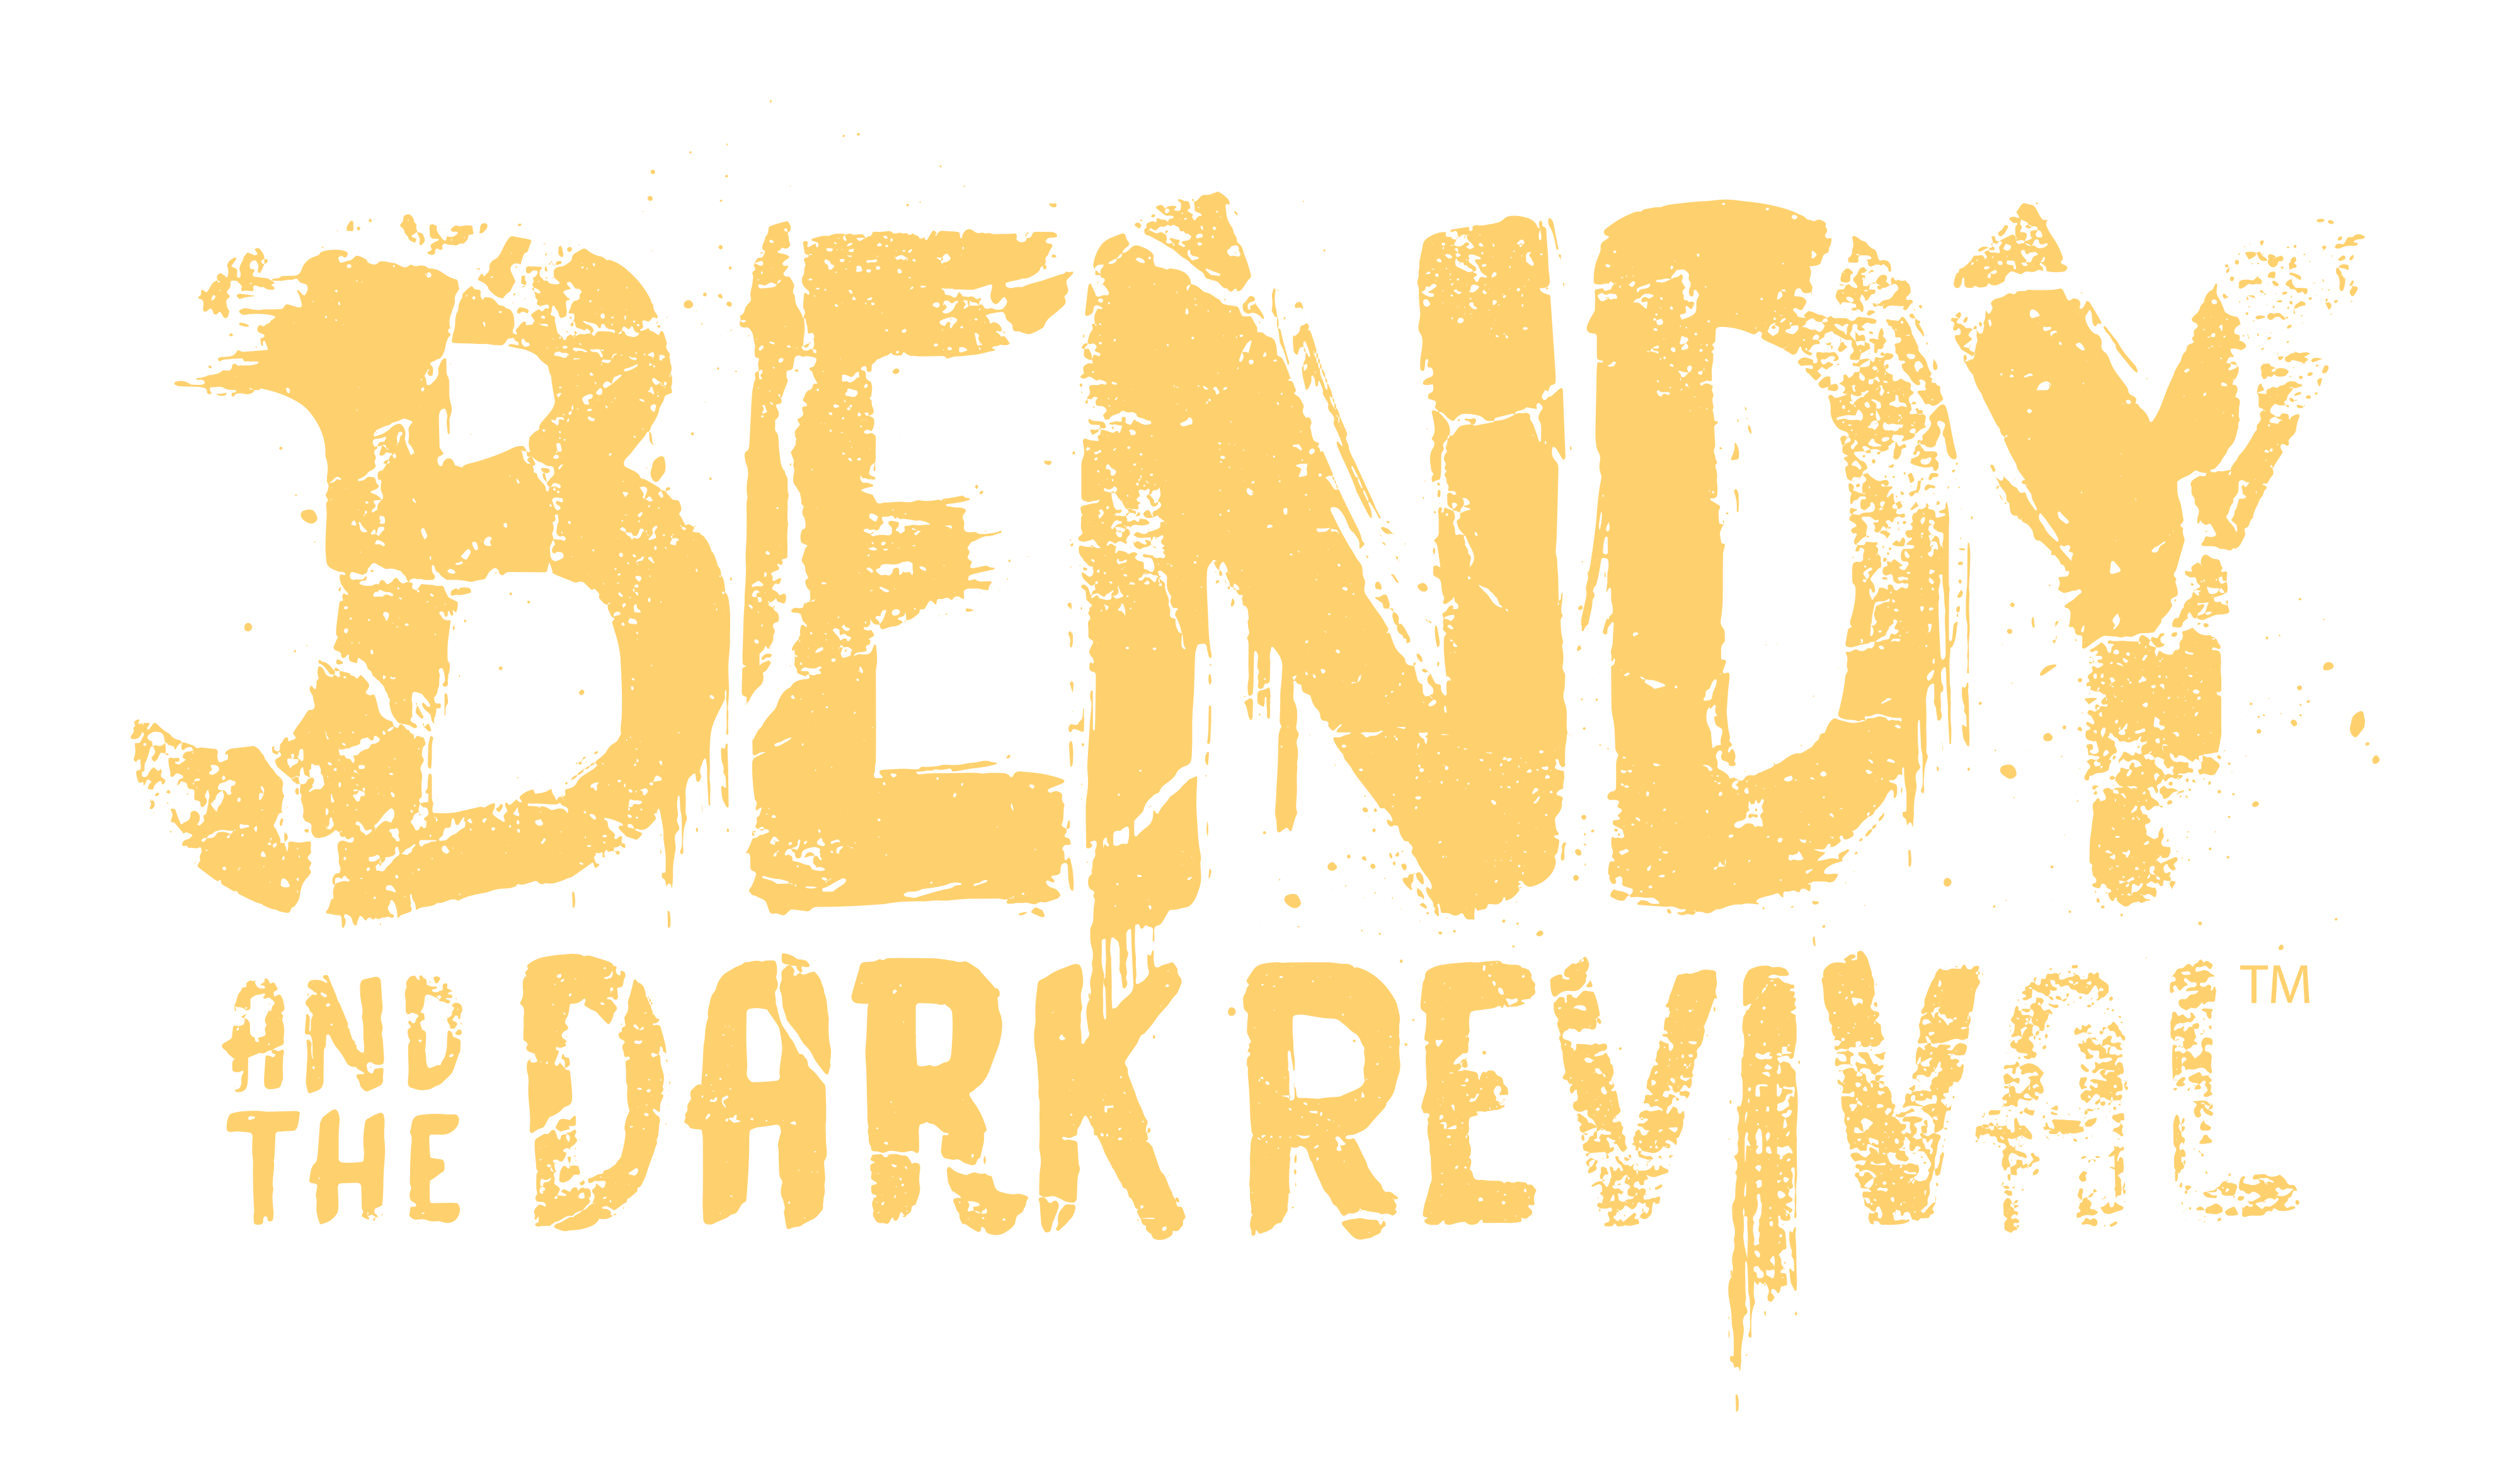 Bendy and the Dark Revival Launches On Consoles March 1st - Rely